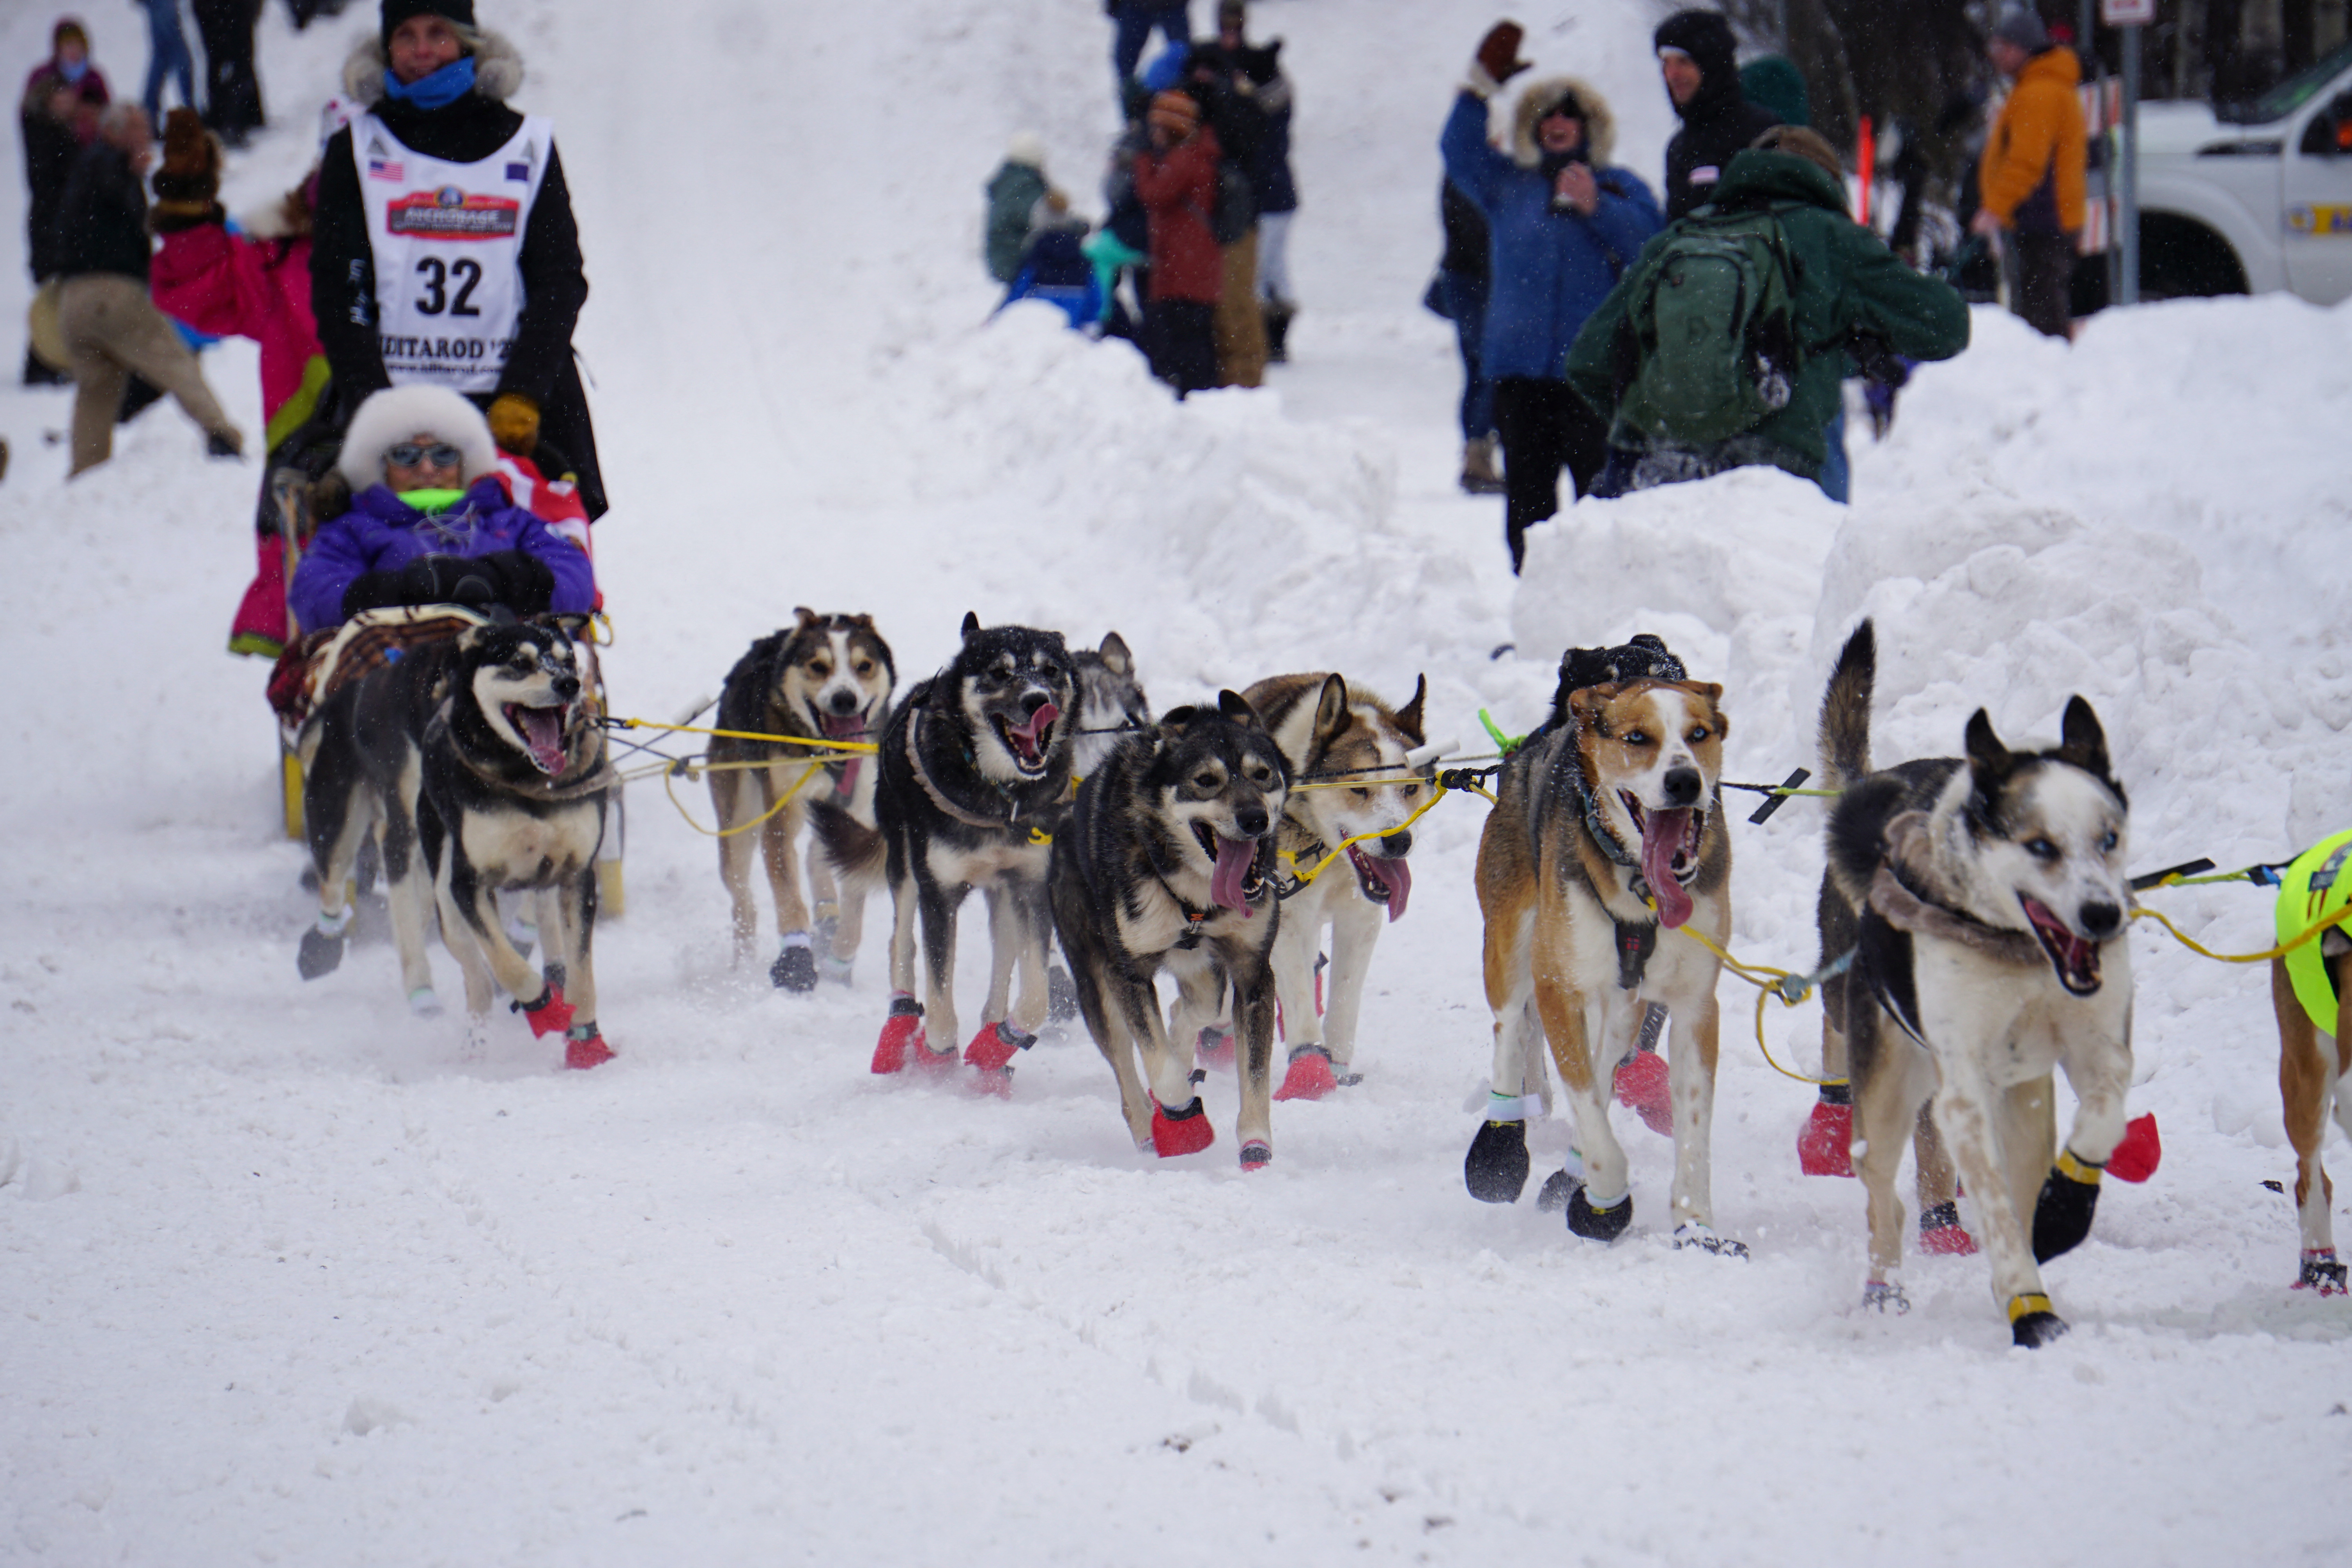 50th running of the Iditarod commences